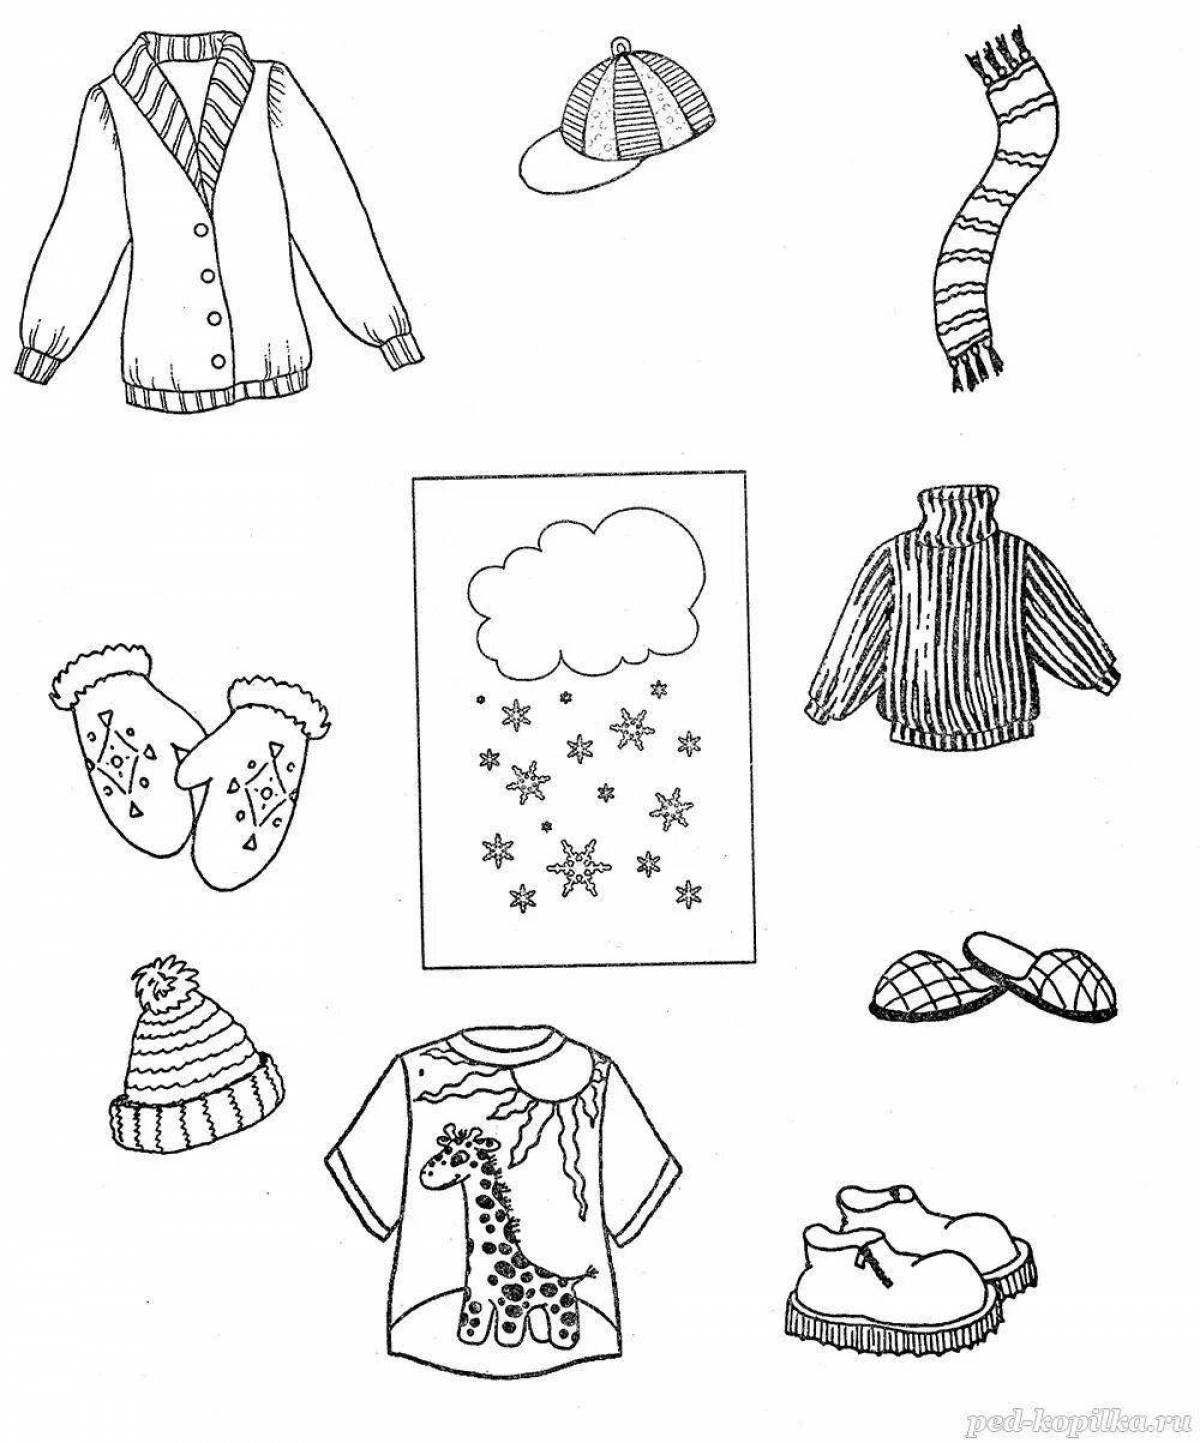 Coloring page stylish clothes